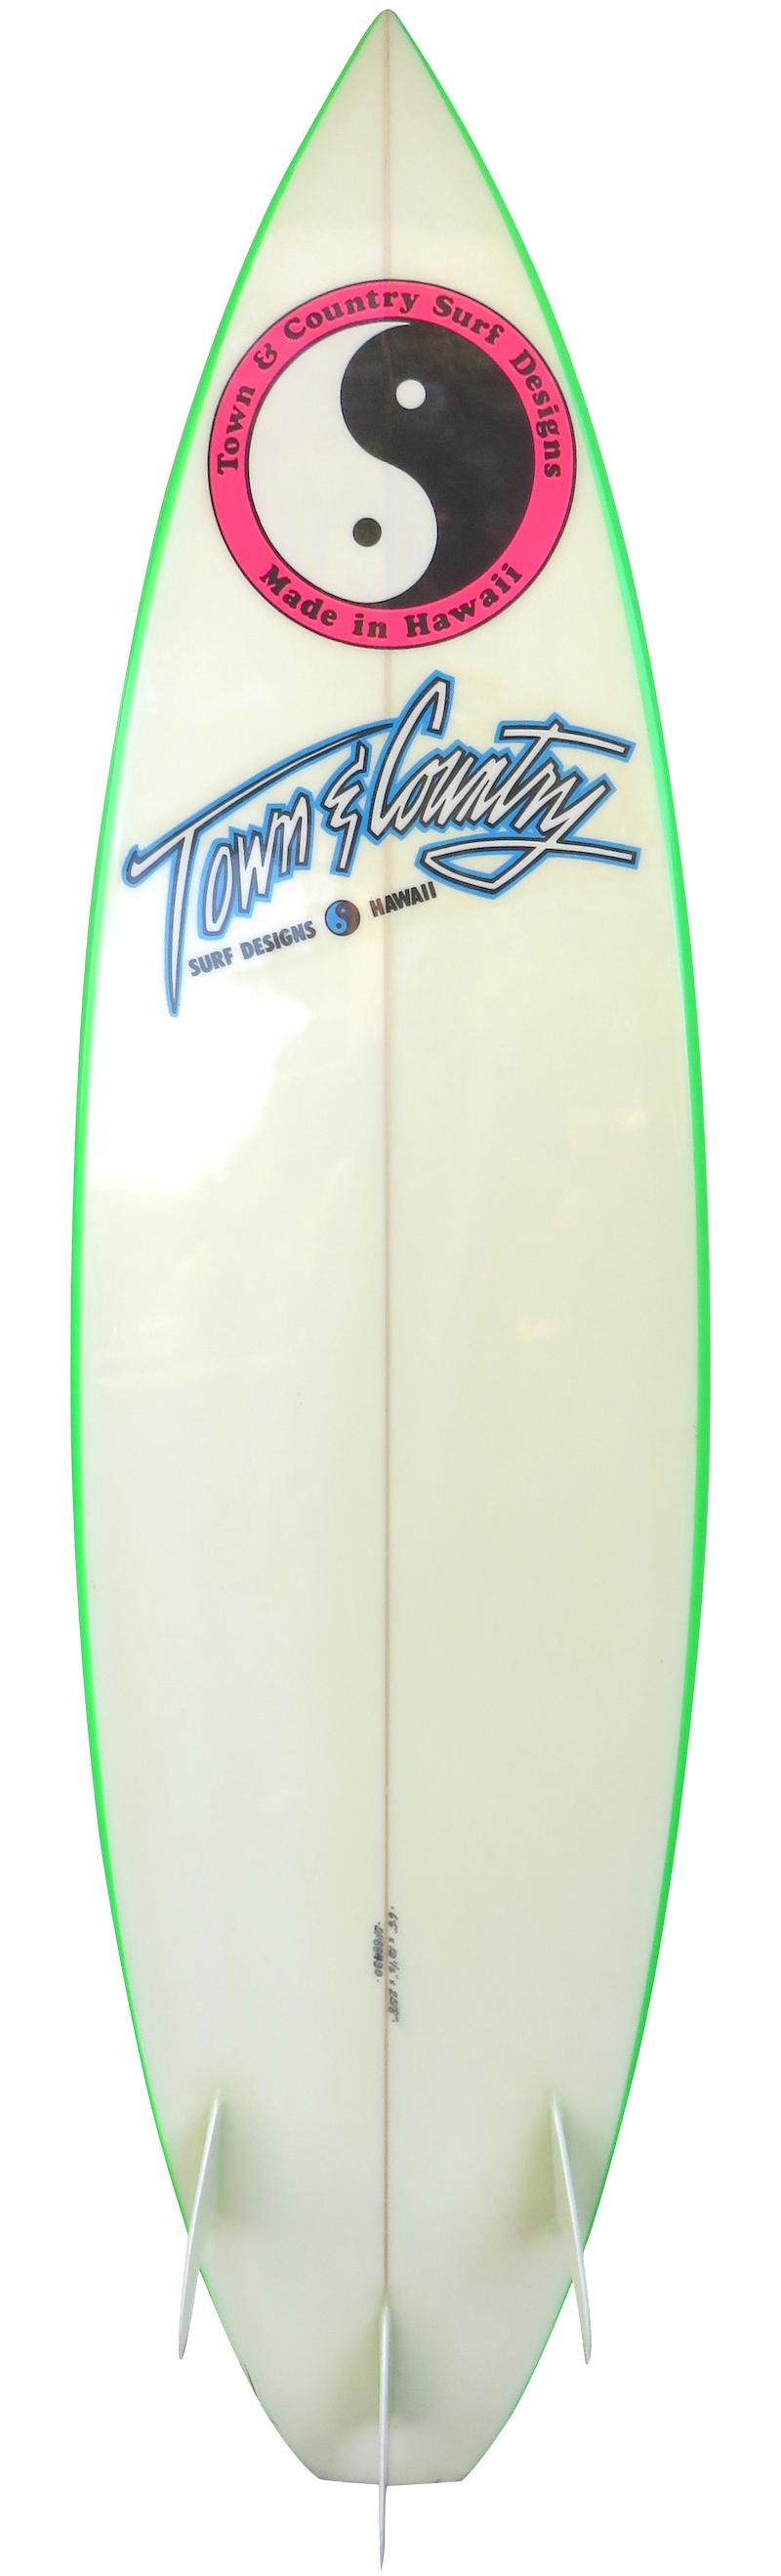 Late 1980s Town & Country (T&C) surfboard shaped by Dennis Pang. Features a vibrant airbrush fade design on deck with candy apple green rails and glassed on thruster (tri-fin) setup. It's extremely difficult to find such a well preserved vintage T&C